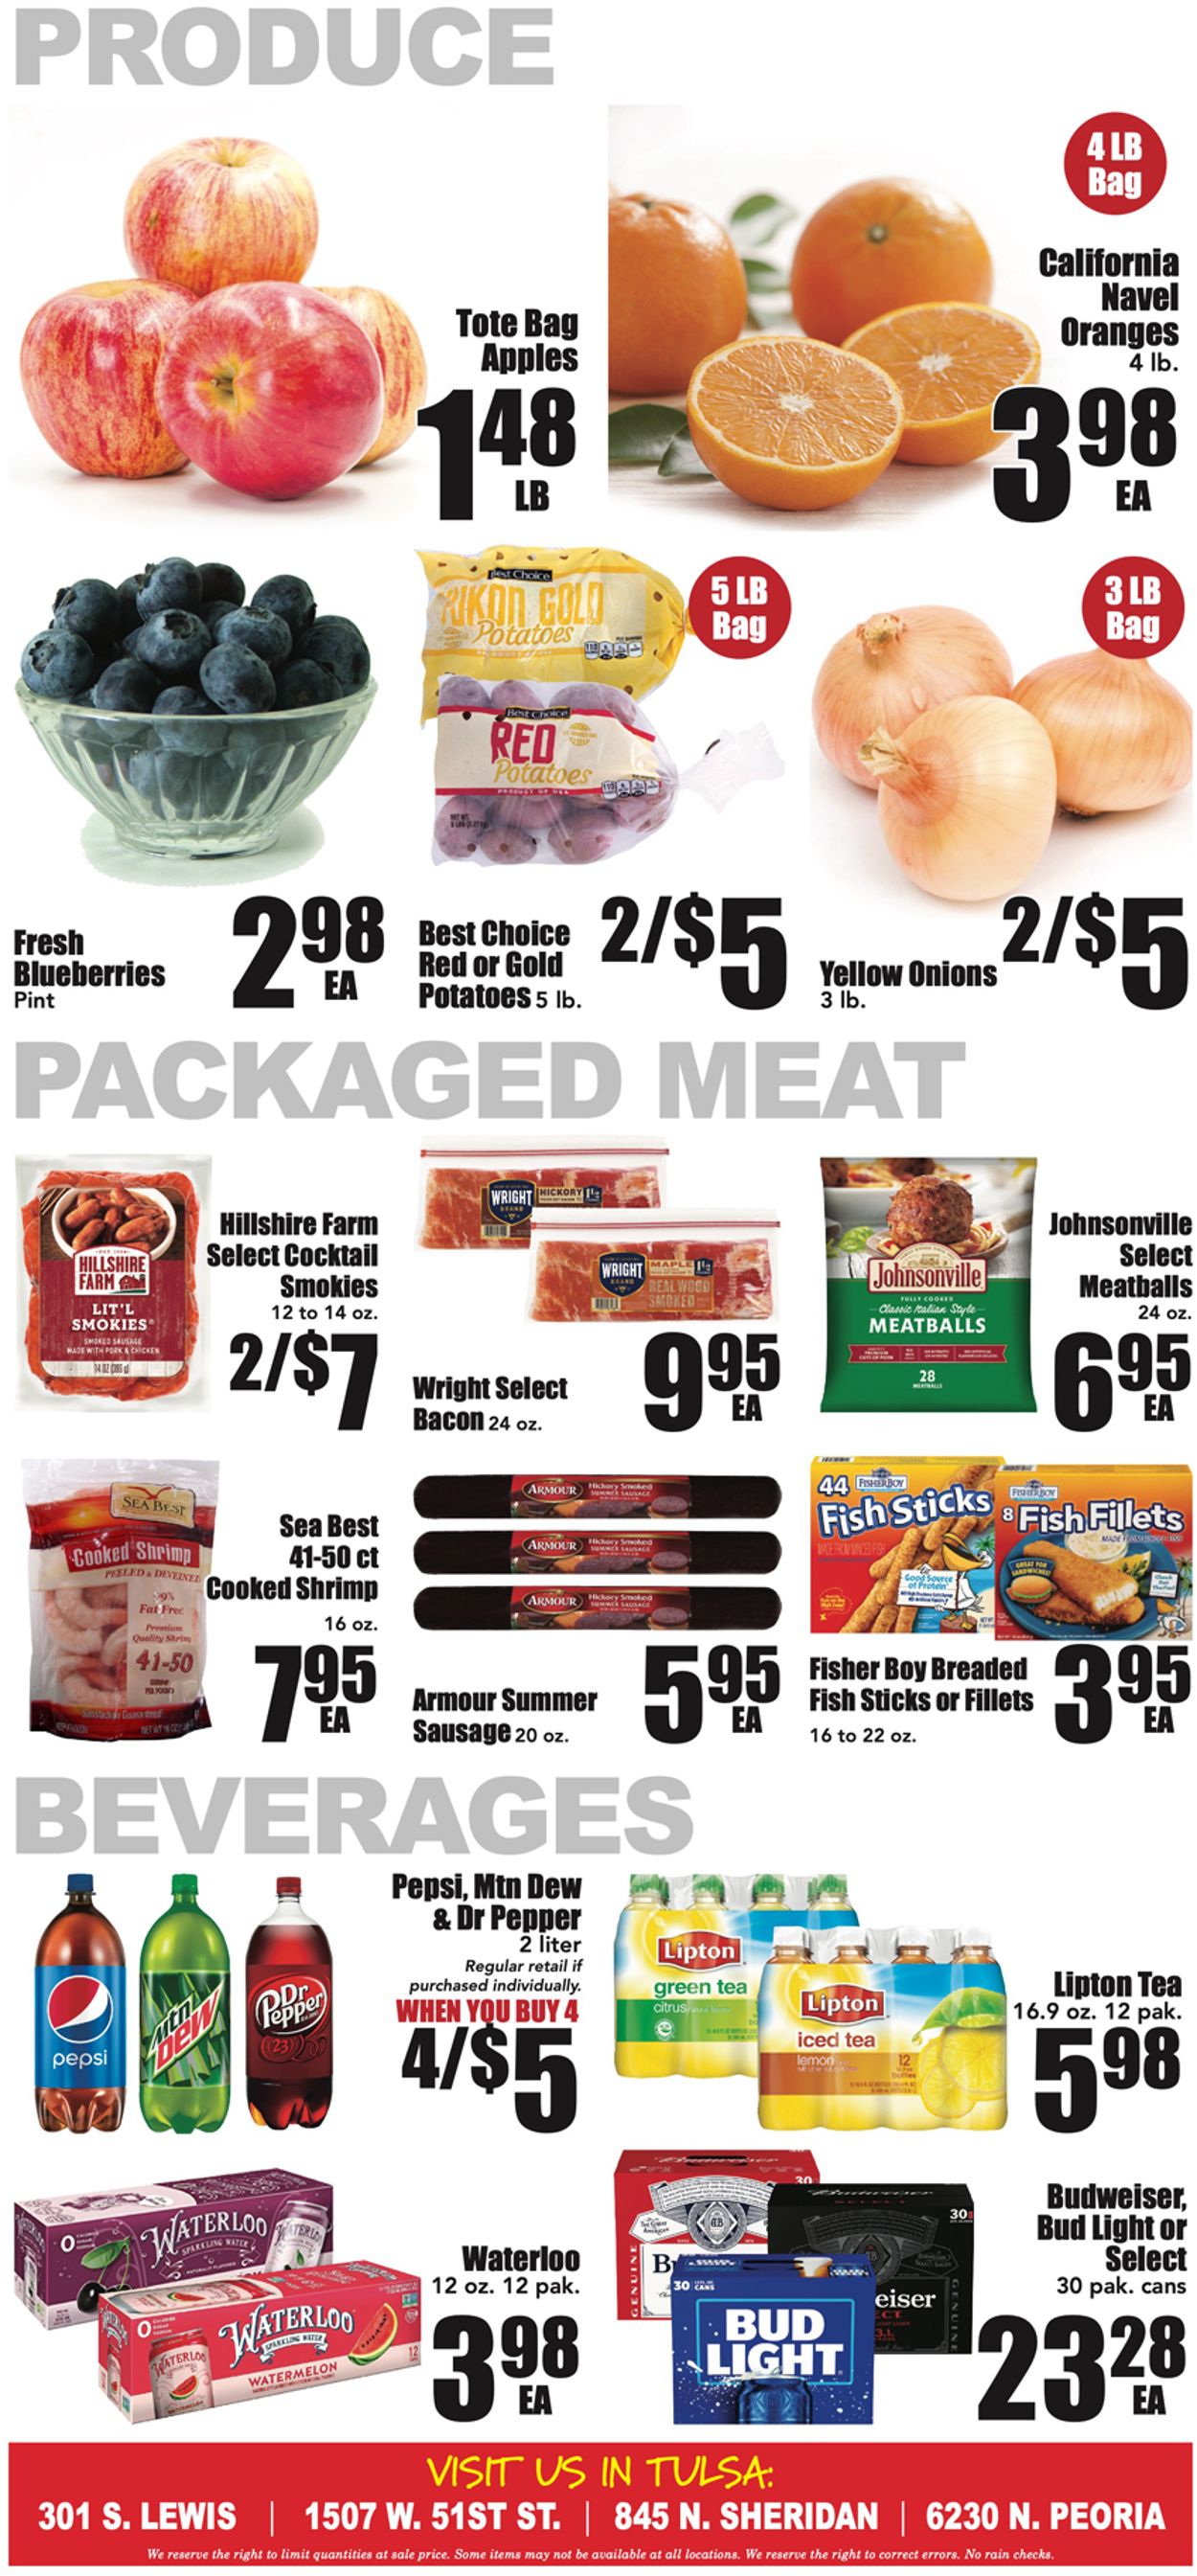 Warehouse Market Ad from 12/29/2021